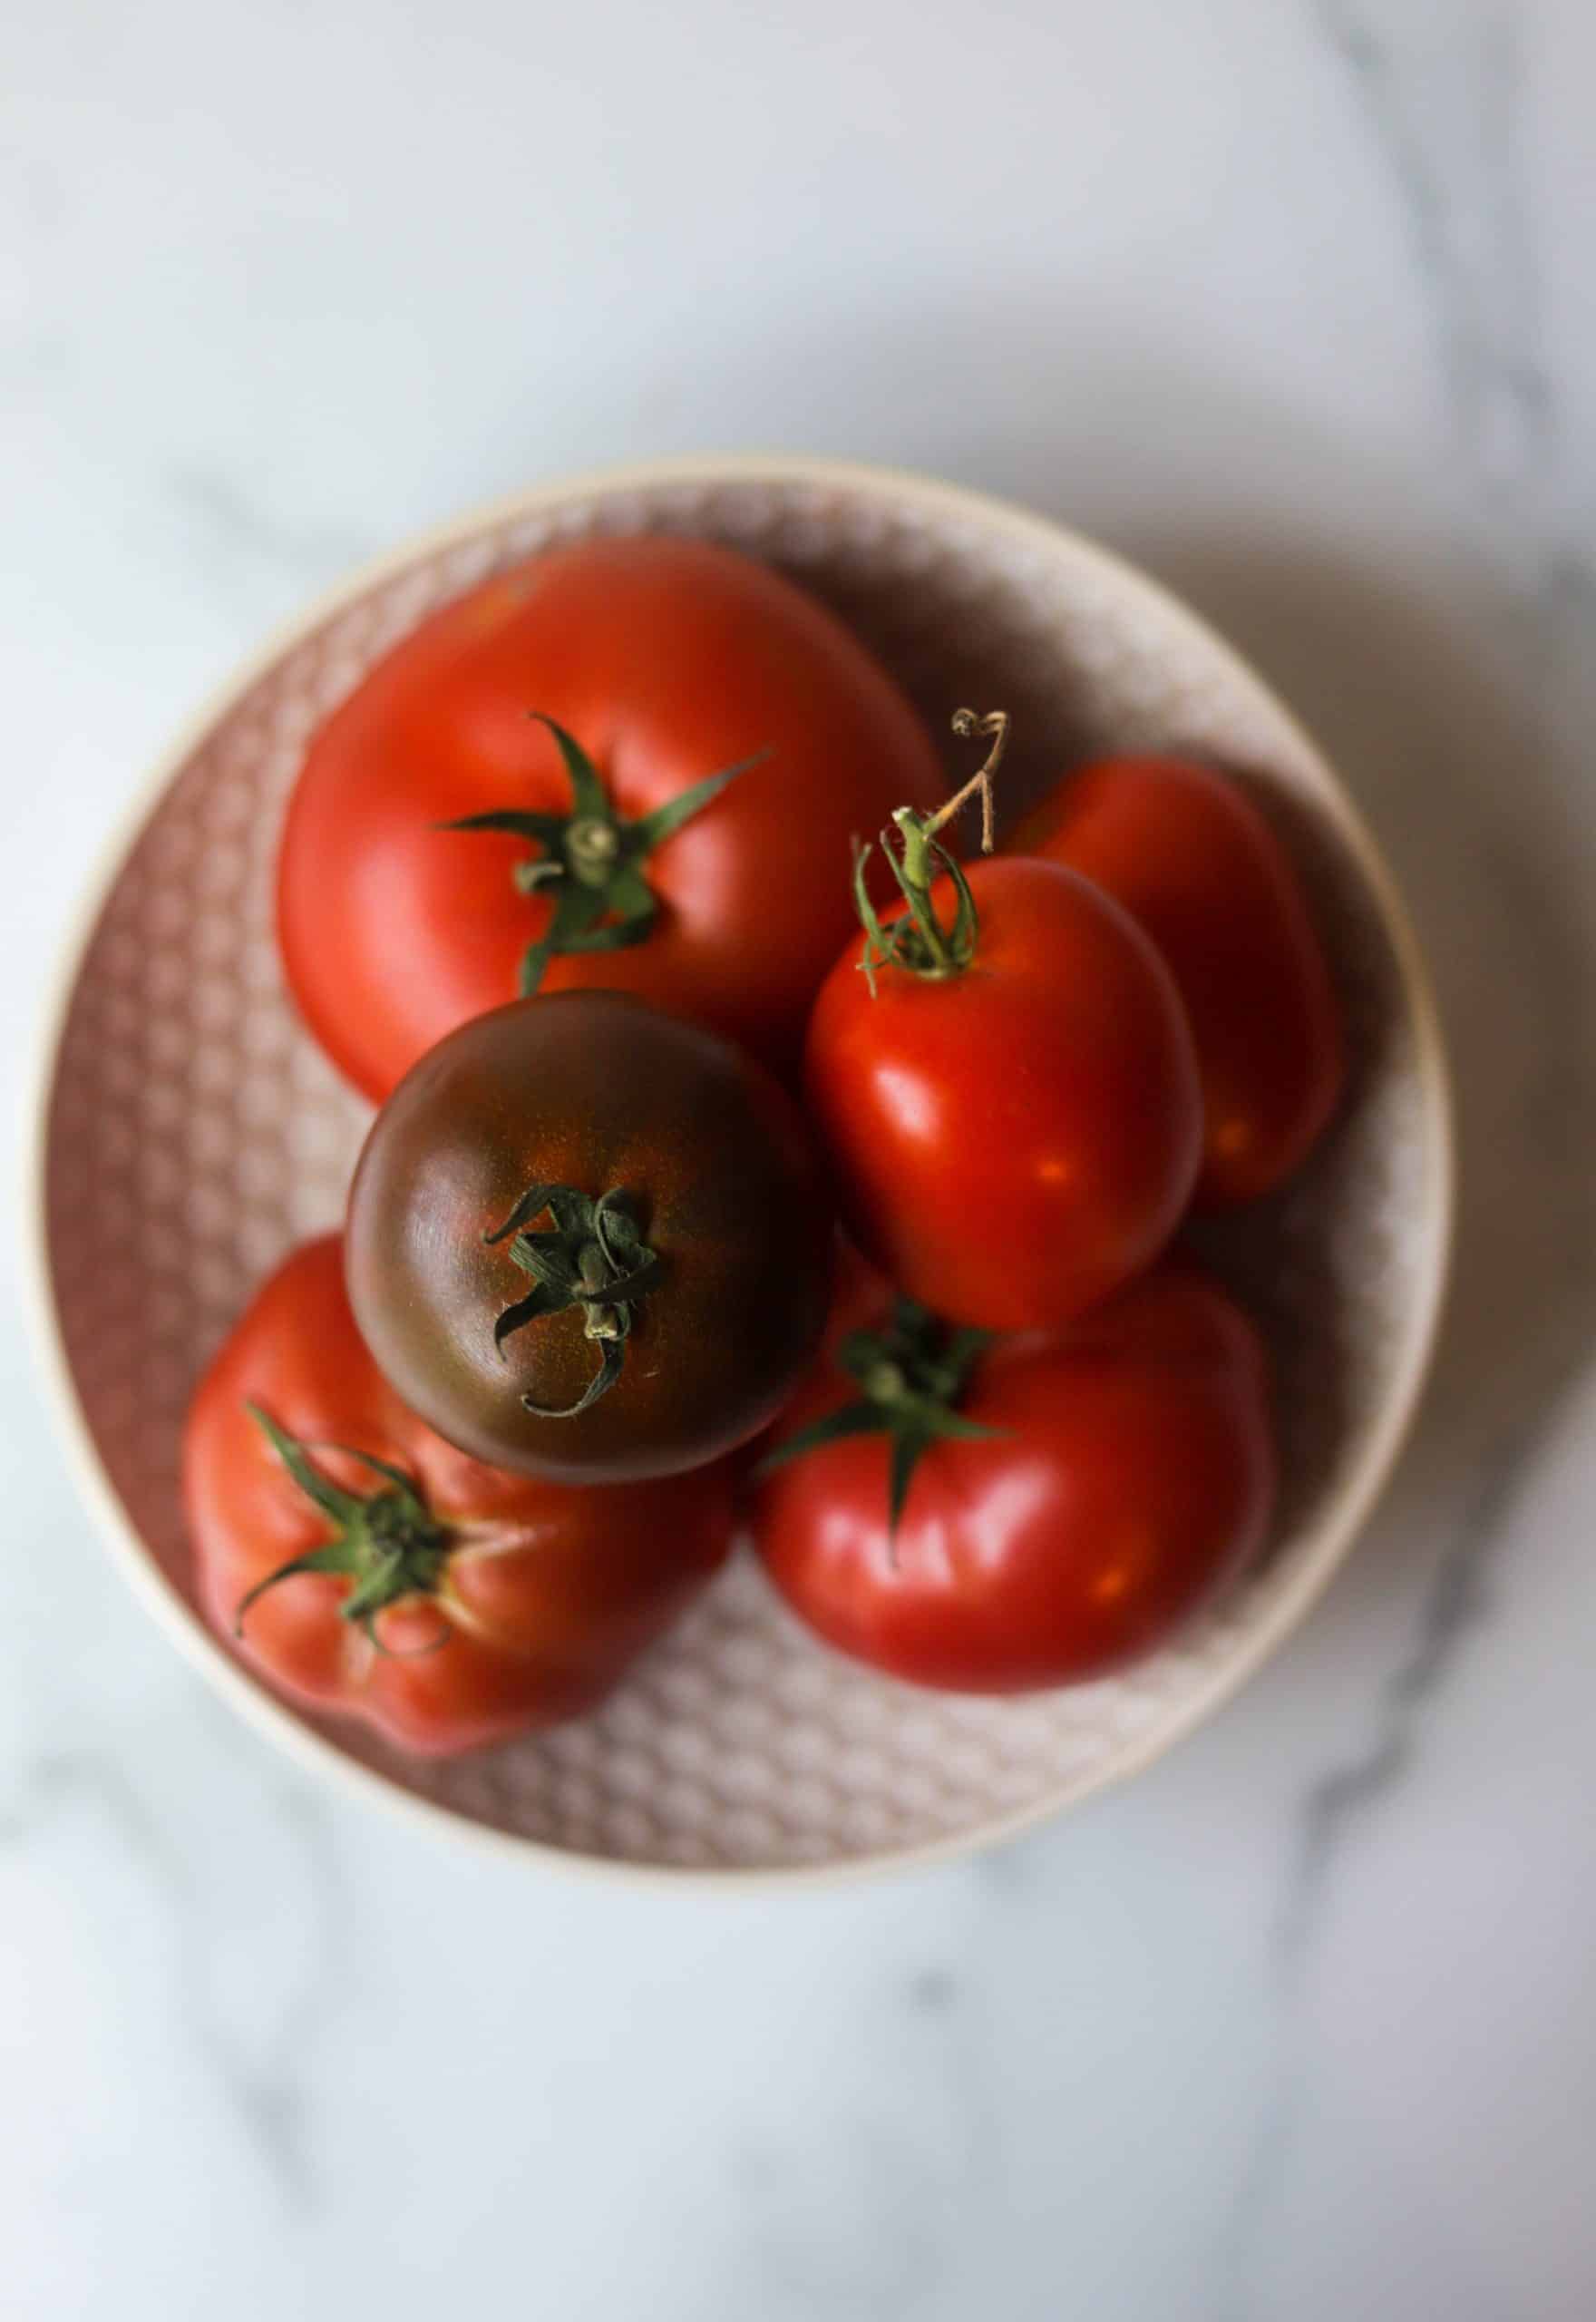 A bowl of heirloom tomatoes.